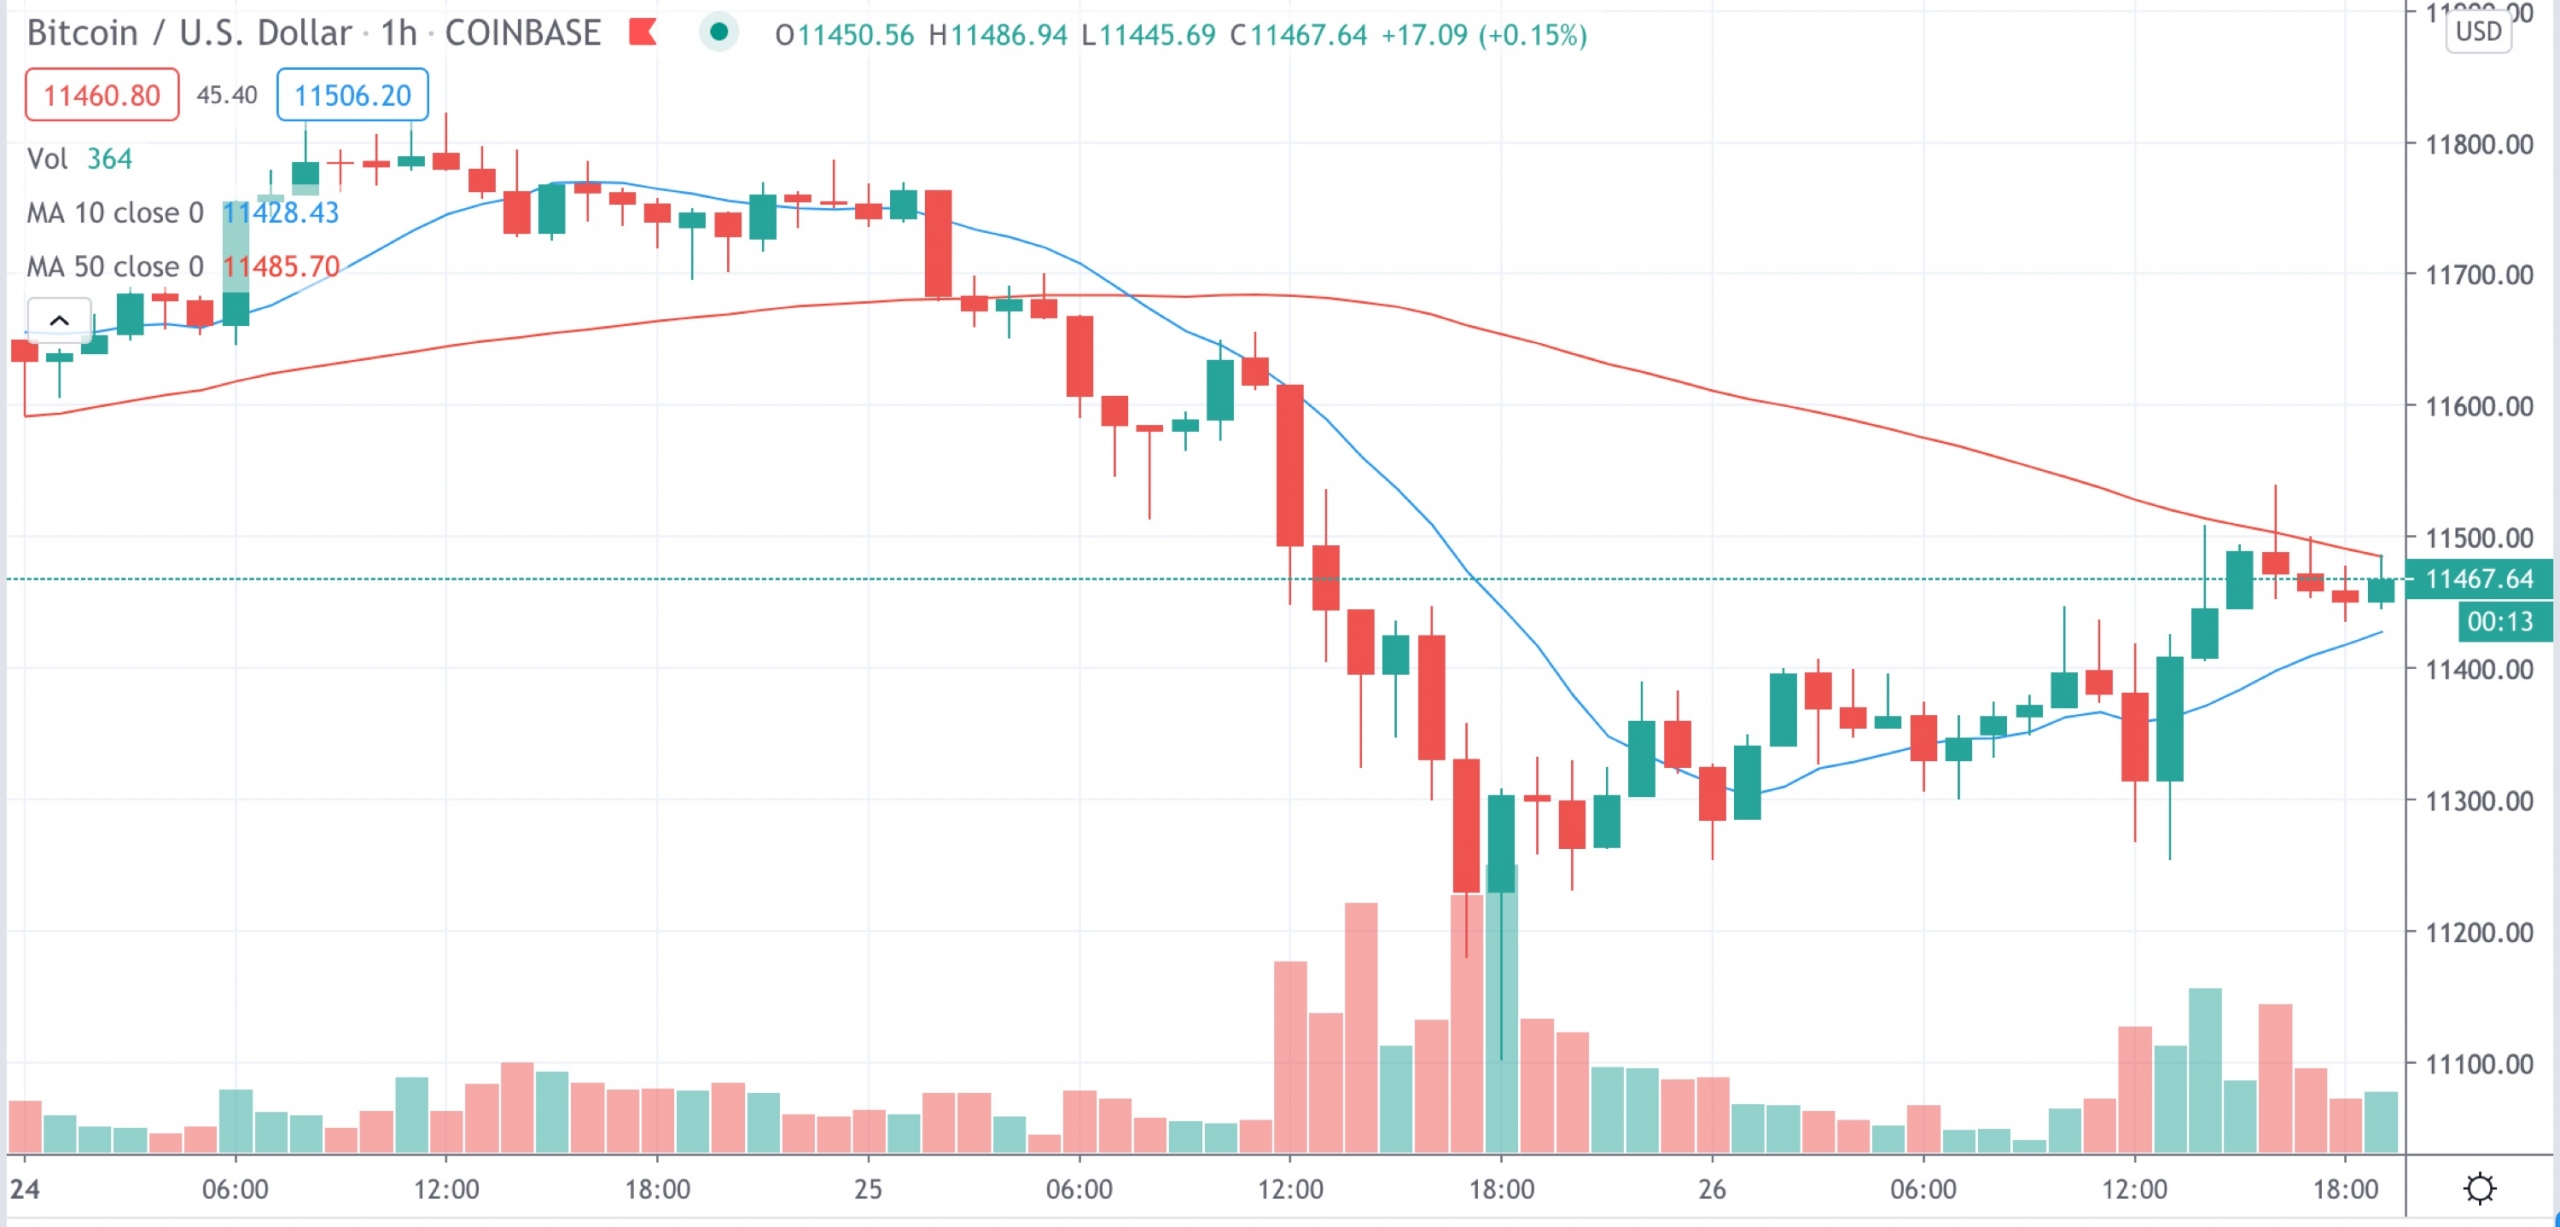 Market Wrap: Bitcoin Braces for $700M in Options to Expire; Record $7B Value Locked in DeFi